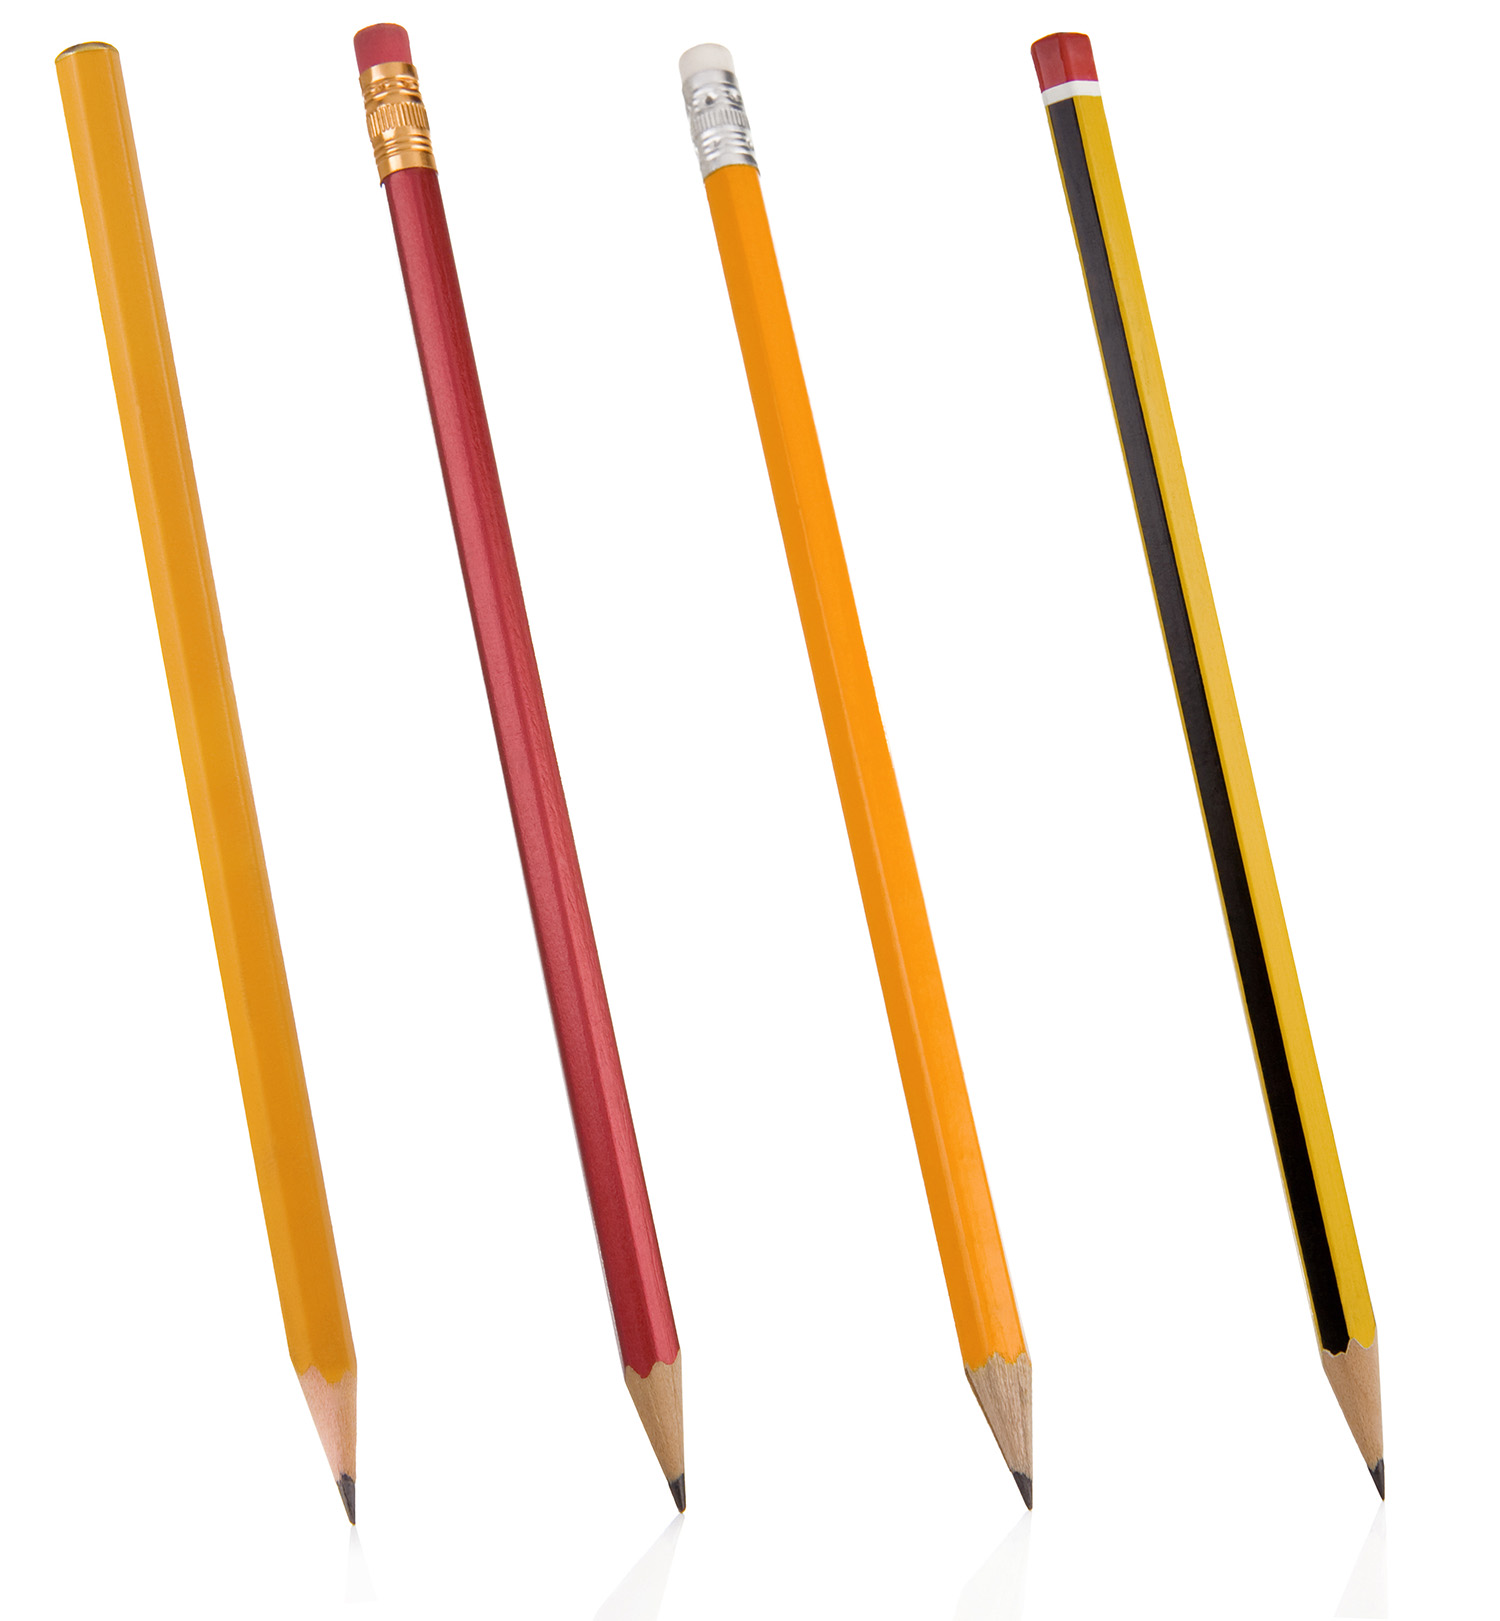 example of pens